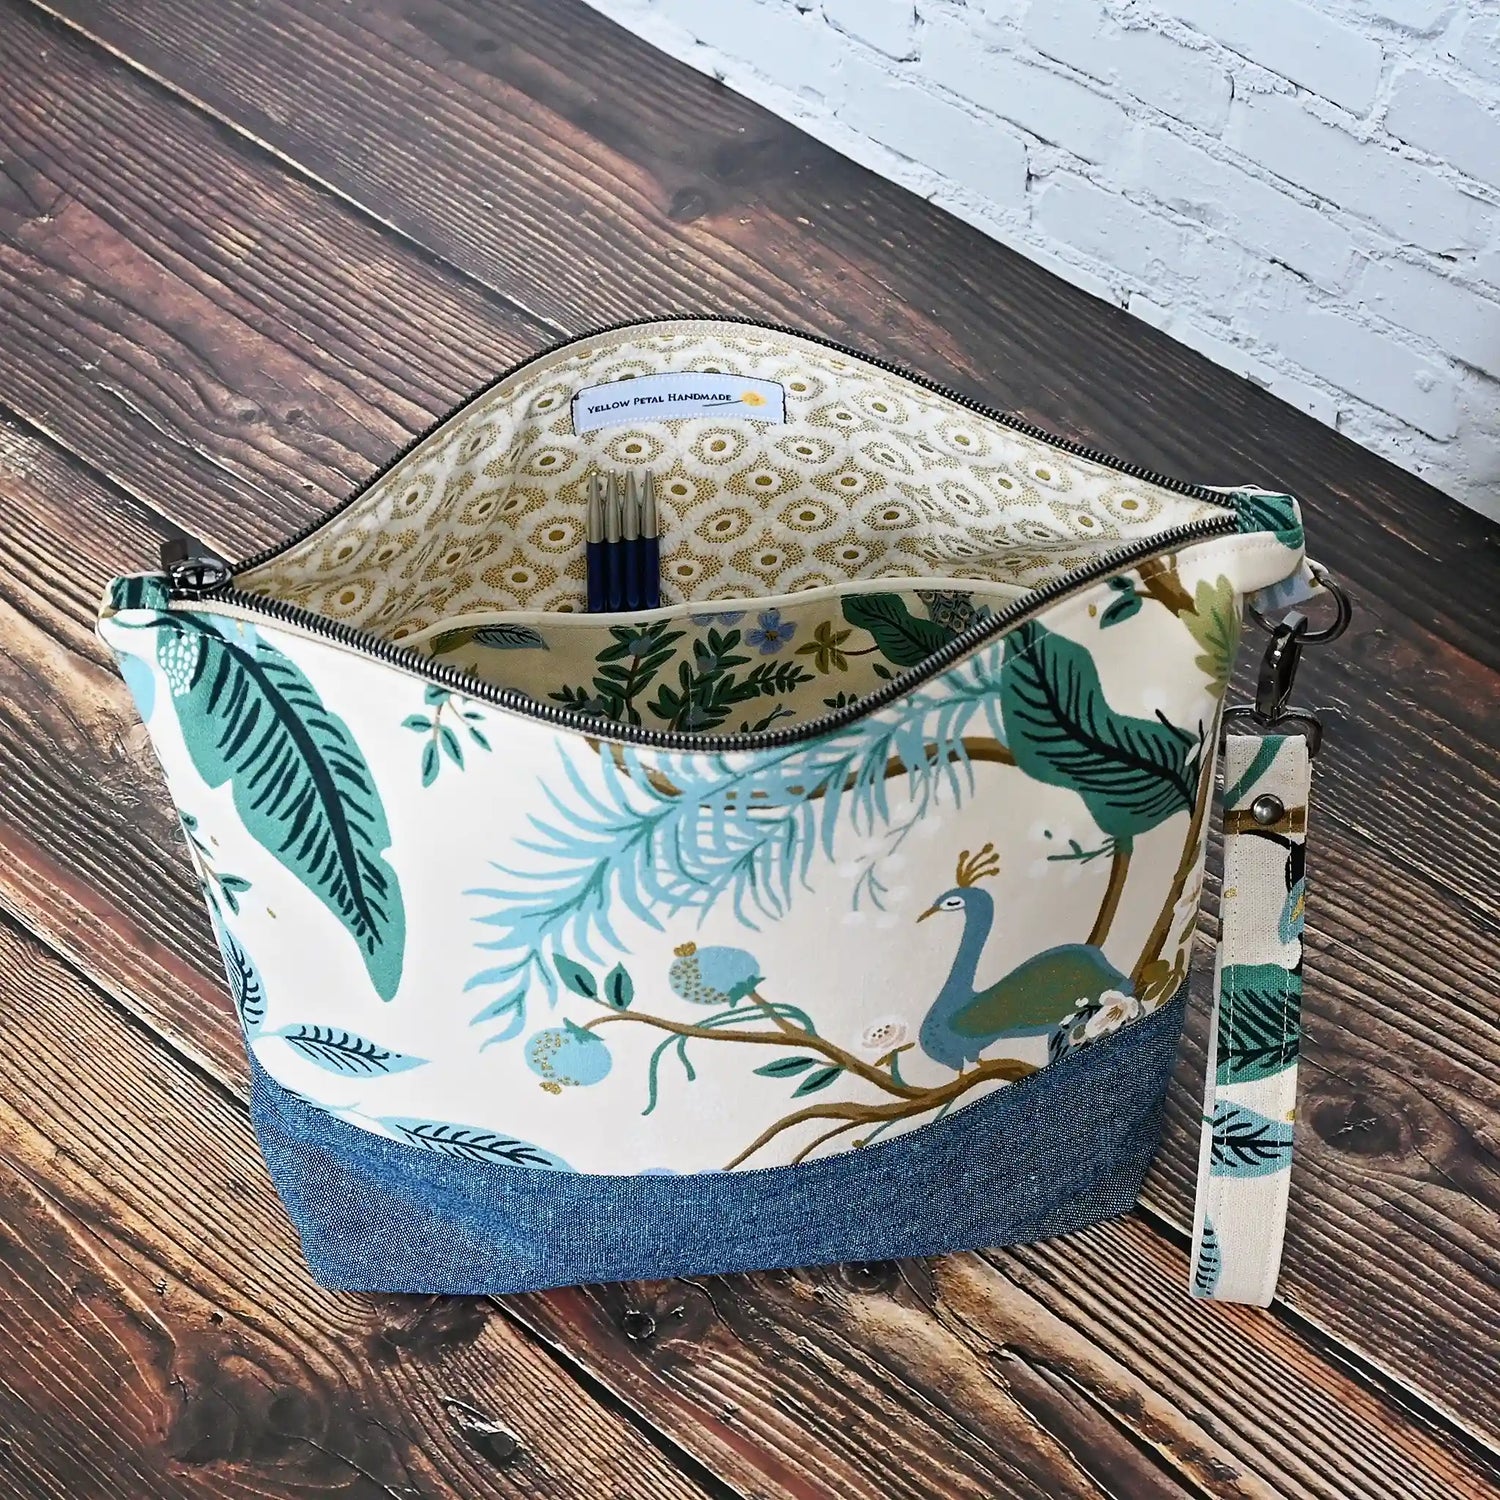 Beautiful two tone canvas and linen knitting project bag in Rifle Paper Co's Antique Garden fabric featuring green and teal florals and peacocks.  Handmade in Canada by Yellow Petal Handmade.